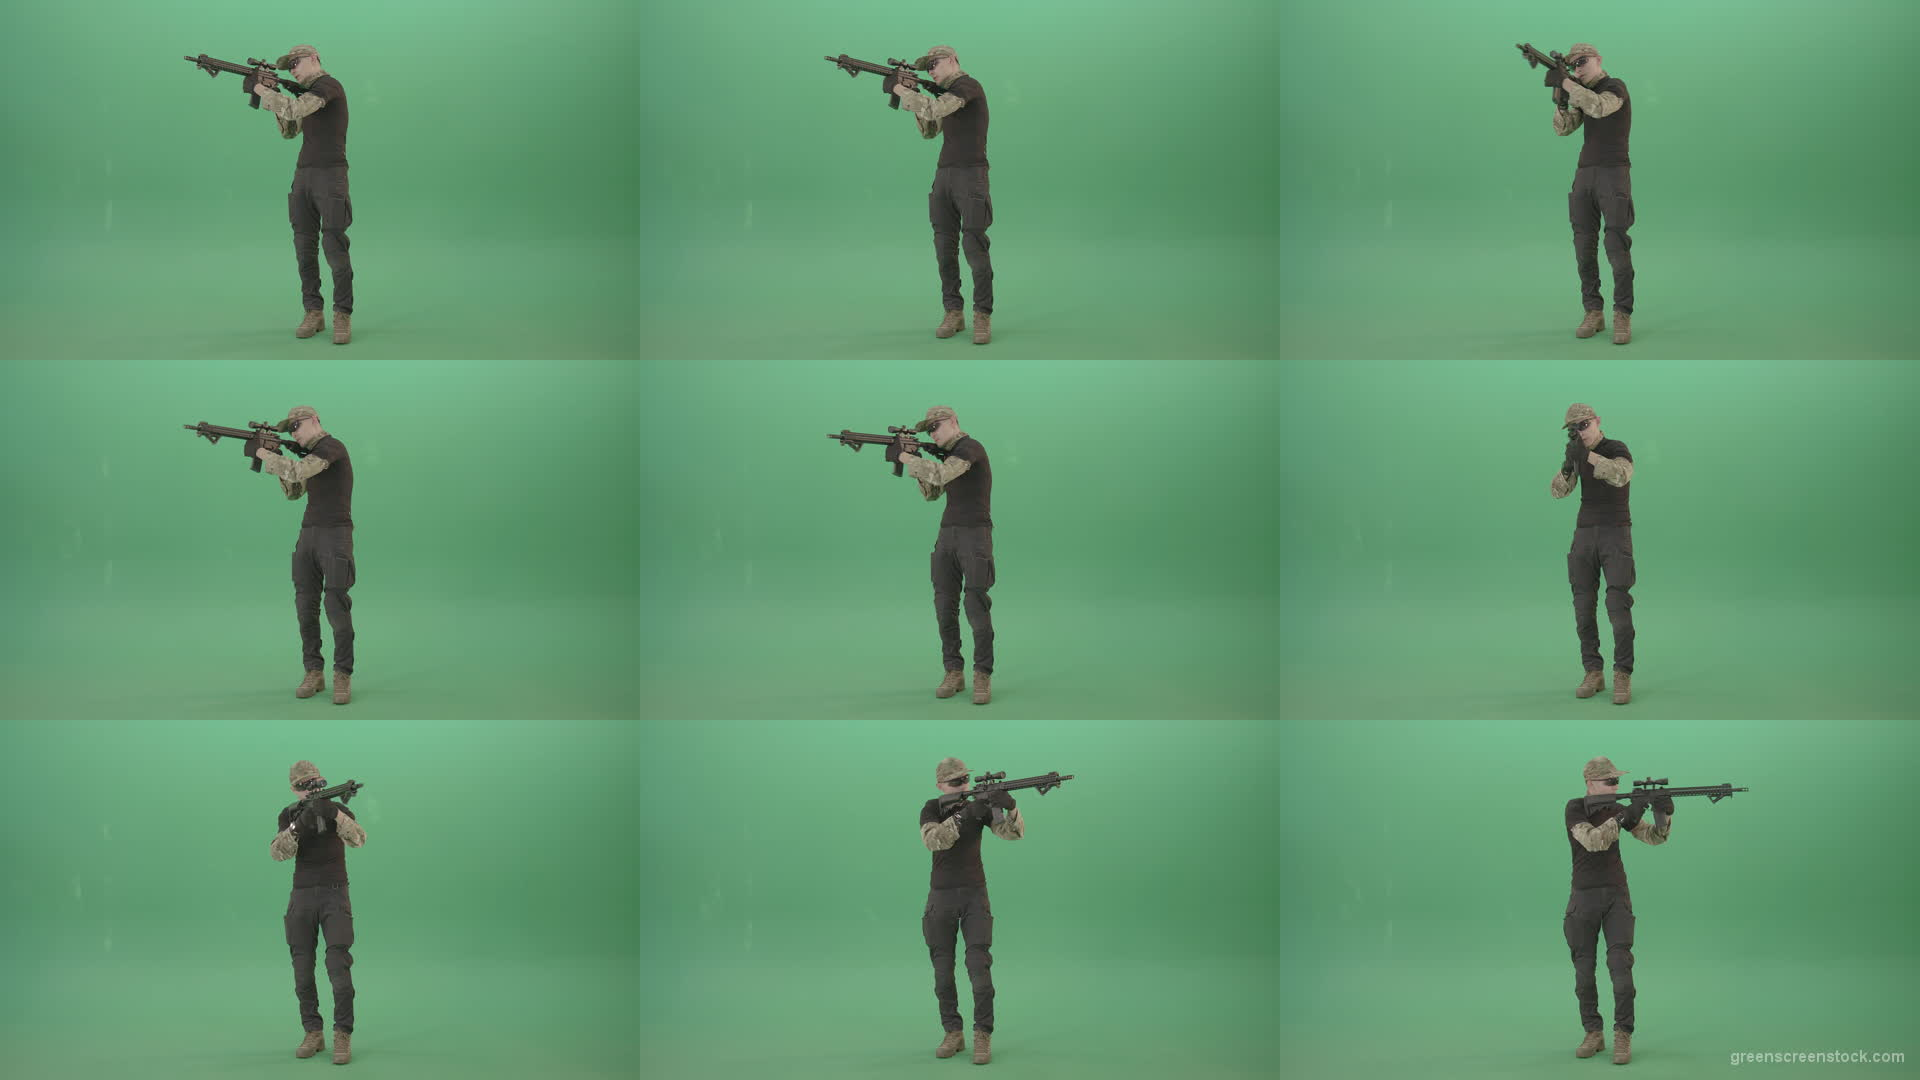 Man-in-Military-uniform-shooting-with-Army-machine-gun-isolated-on-Green-Screen-4K-Video-Footage-1920 Green Screen Stock